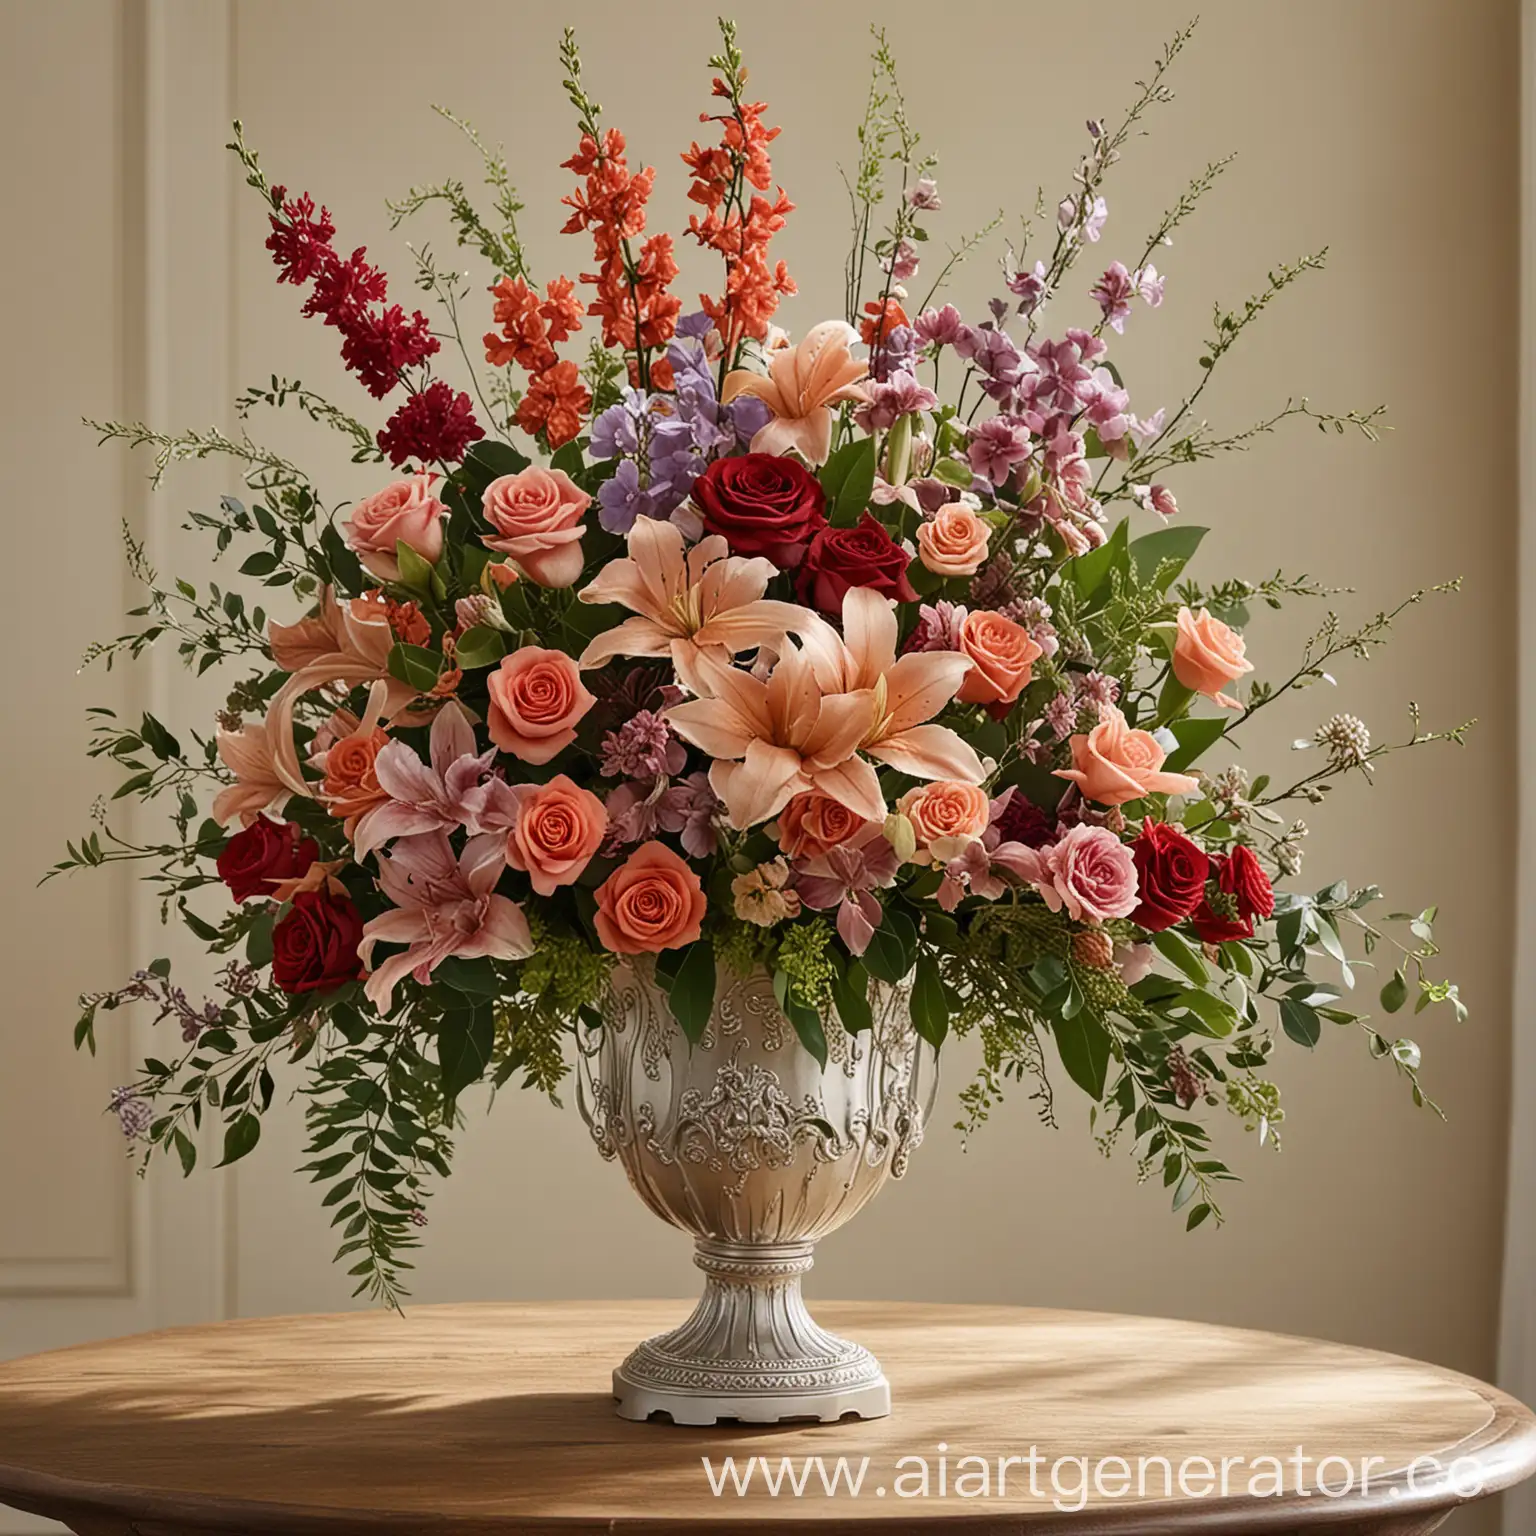 Floral arrangements enhance the beauty of any setting, showcasing the artistry and creativity of florists.